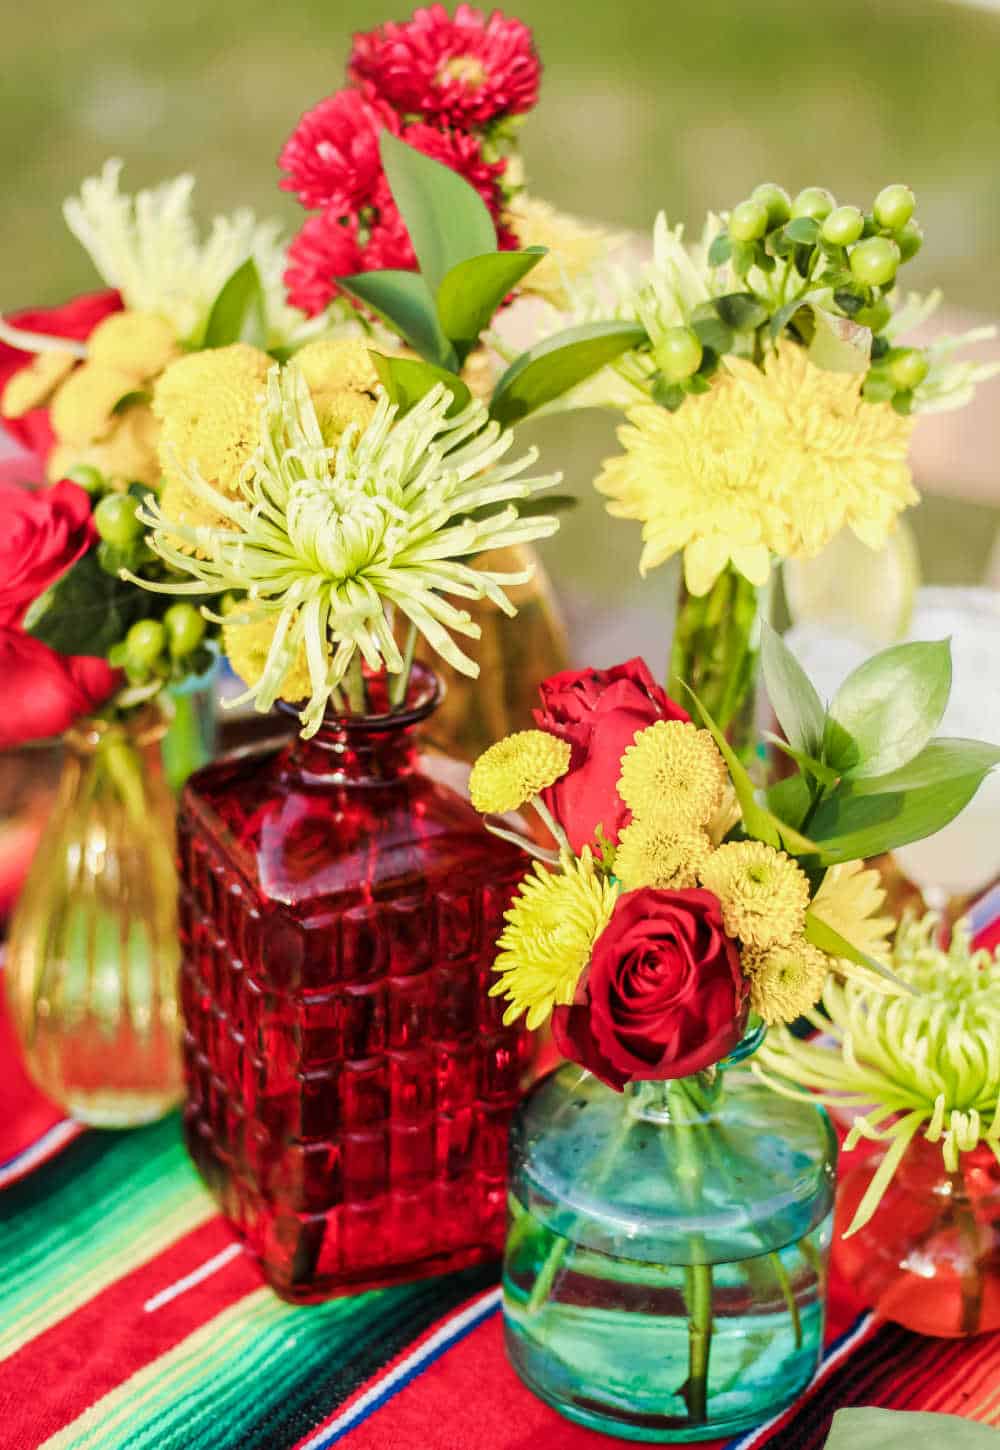 colorful arrangement of flowers in small glass vases on Mexican serape.